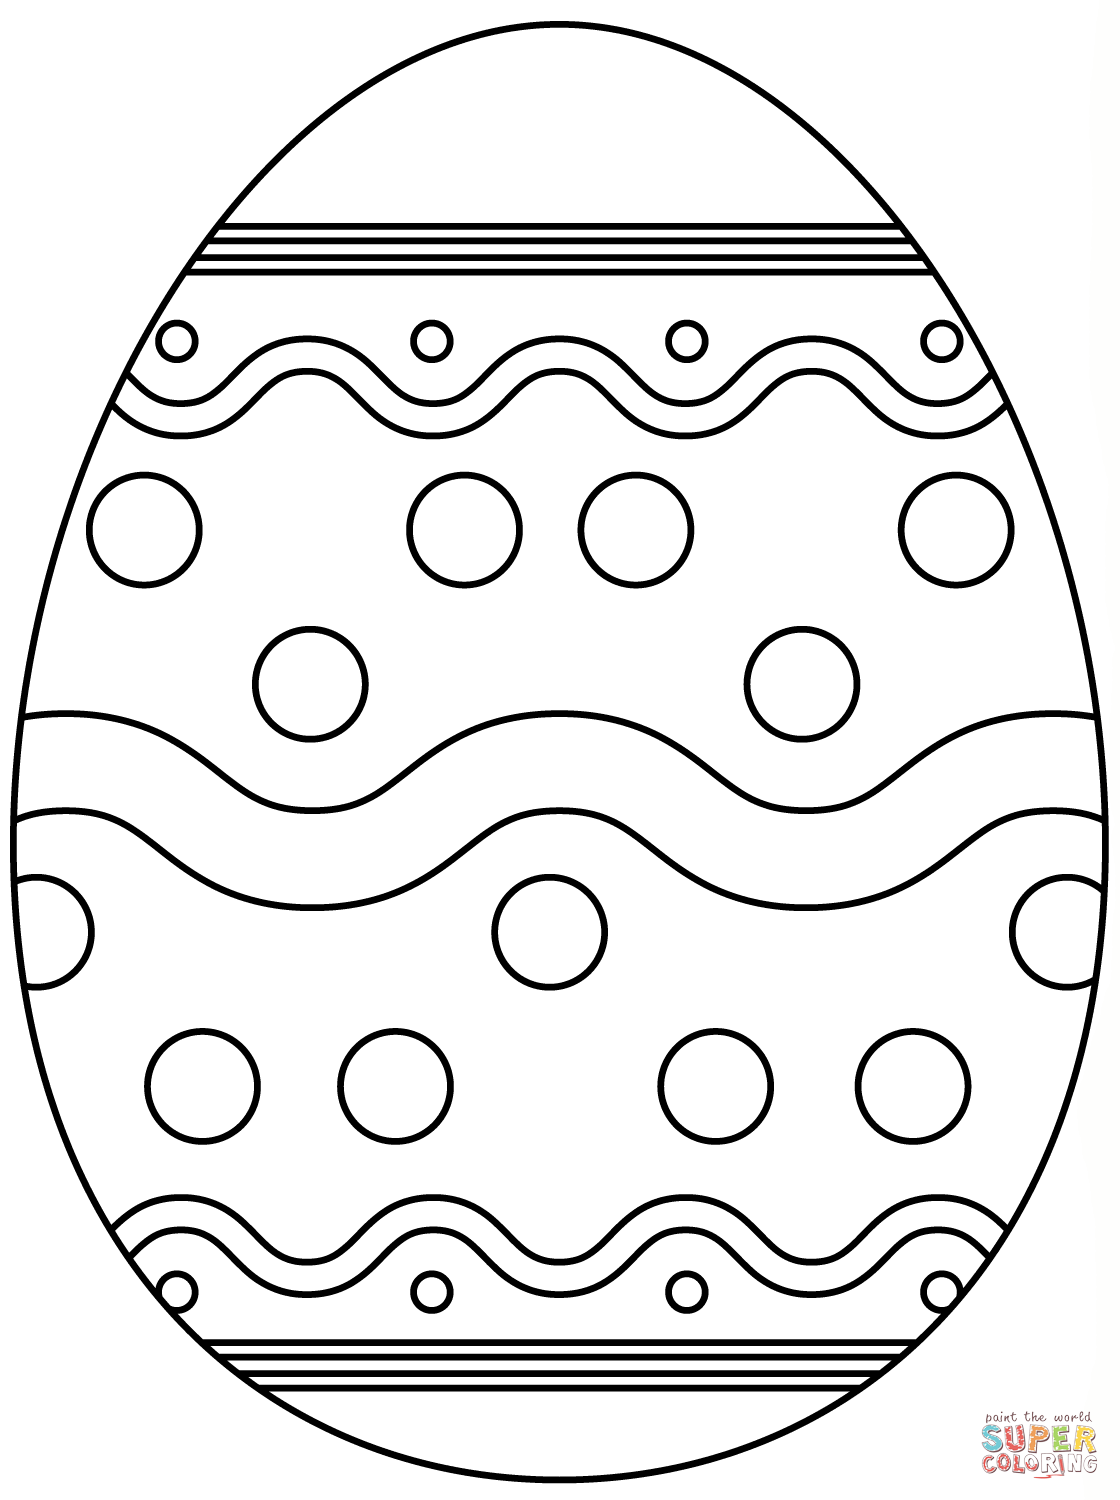 Printable Easter Egg Coloring Pages at GetColorings.com ...